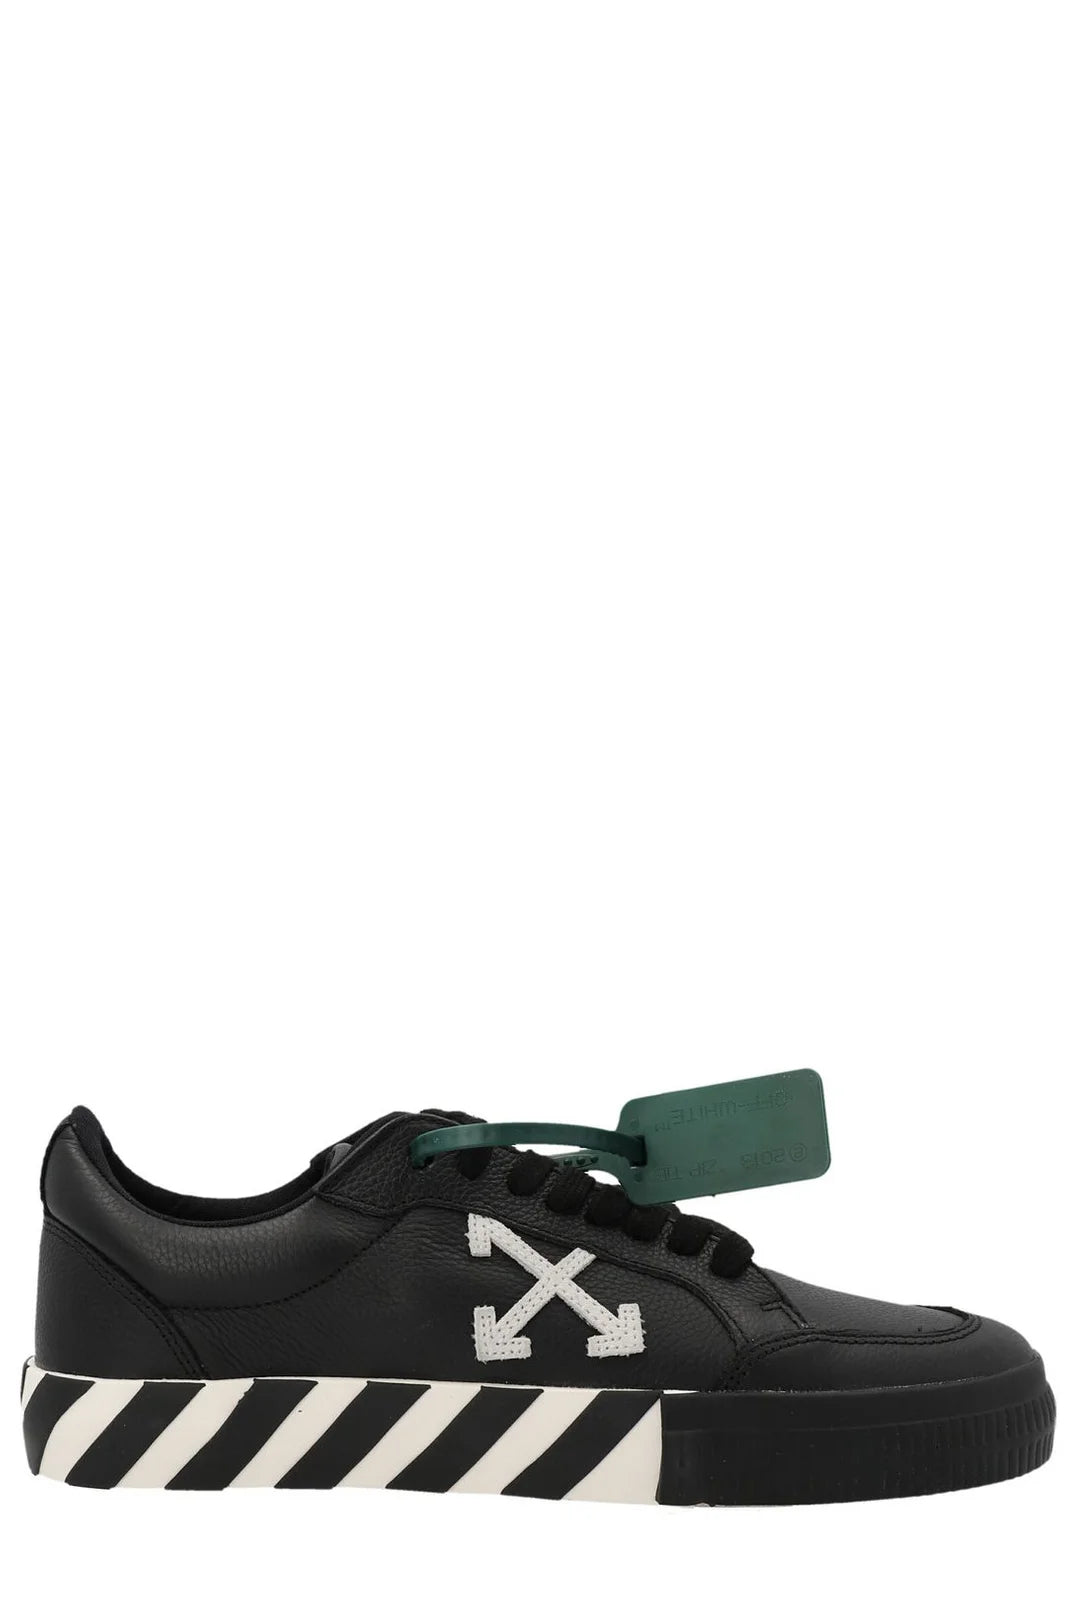 Off-White Vulcanized Lace-Up Sneakers - Used